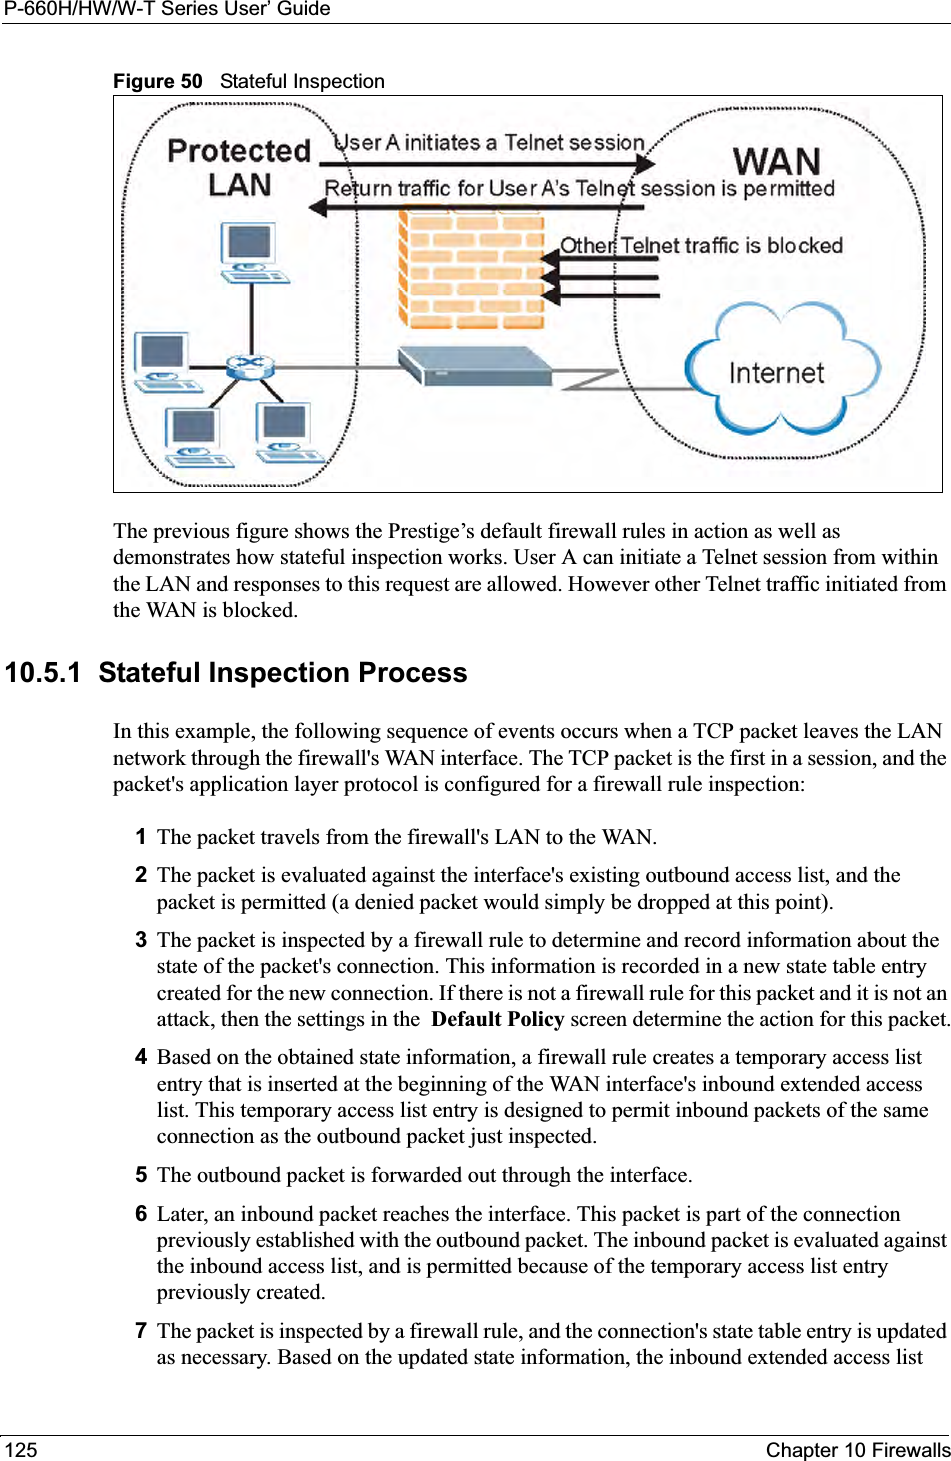 P-660H/HW/W-T Series User’ Guide125 Chapter 10 FirewallsFigure 50   Stateful InspectionThe previous figure shows the Prestige’s default firewall rules in action as well as demonstrates how stateful inspection works. User A can initiate a Telnet session from within the LAN and responses to this request are allowed. However other Telnet traffic initiated from the WAN is blocked.10.5.1  Stateful Inspection ProcessIn this example, the following sequence of events occurs when a TCP packet leaves the LAN network through the firewall&apos;s WAN interface. The TCP packet is the first in a session, and the packet&apos;s application layer protocol is configured for a firewall rule inspection:1The packet travels from the firewall&apos;s LAN to the WAN.2The packet is evaluated against the interface&apos;s existing outbound access list, and the packet is permitted (a denied packet would simply be dropped at this point).3The packet is inspected by a firewall rule to determine and record information about the state of the packet&apos;s connection. This information is recorded in a new state table entry created for the new connection. If there is not a firewall rule for this packet and it is not an attack, then the settings in the  Default Policy screen determine the action for this packet.4Based on the obtained state information, a firewall rule creates a temporary access list entry that is inserted at the beginning of the WAN interface&apos;s inbound extended access list. This temporary access list entry is designed to permit inbound packets of the same connection as the outbound packet just inspected.5The outbound packet is forwarded out through the interface.6Later, an inbound packet reaches the interface. This packet is part of the connection previously established with the outbound packet. The inbound packet is evaluated against the inbound access list, and is permitted because of the temporary access list entry previously created.7The packet is inspected by a firewall rule, and the connection&apos;s state table entry is updated as necessary. Based on the updated state information, the inbound extended access list 